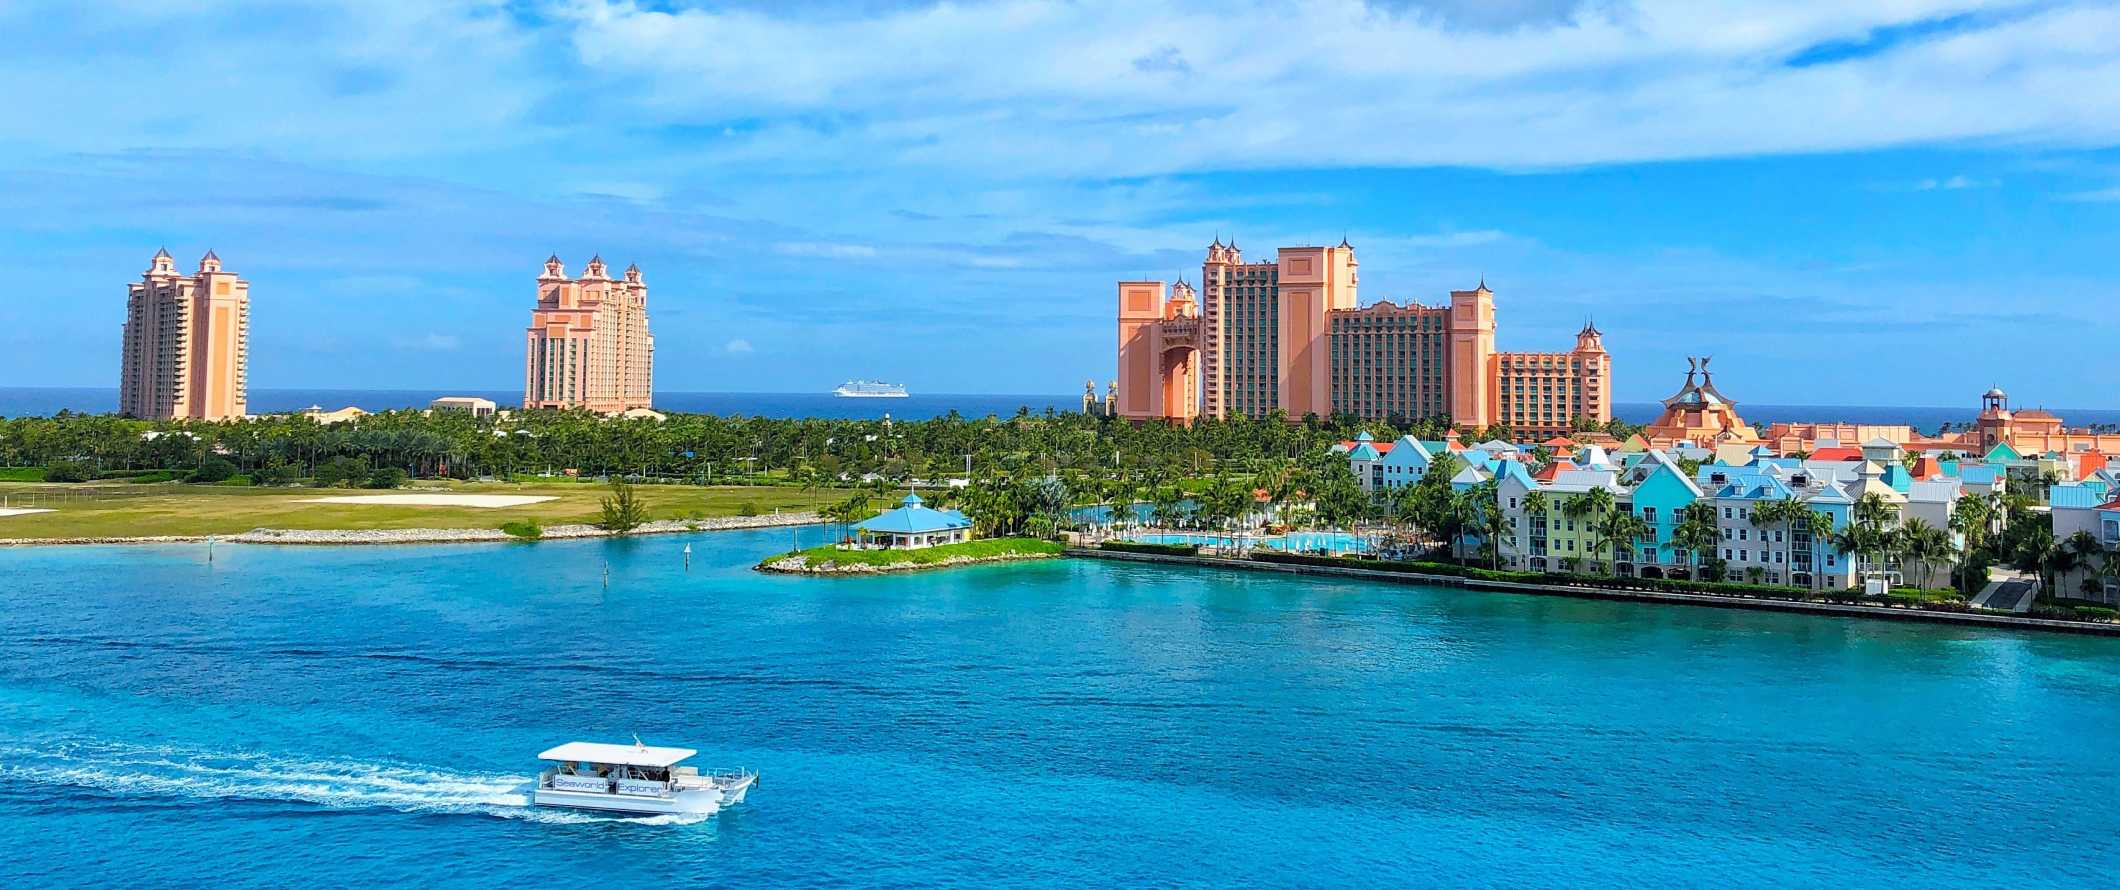 The Atlantis hotel complex in the background with a boat going by bright blue waters in theforeground, in the Bahamas